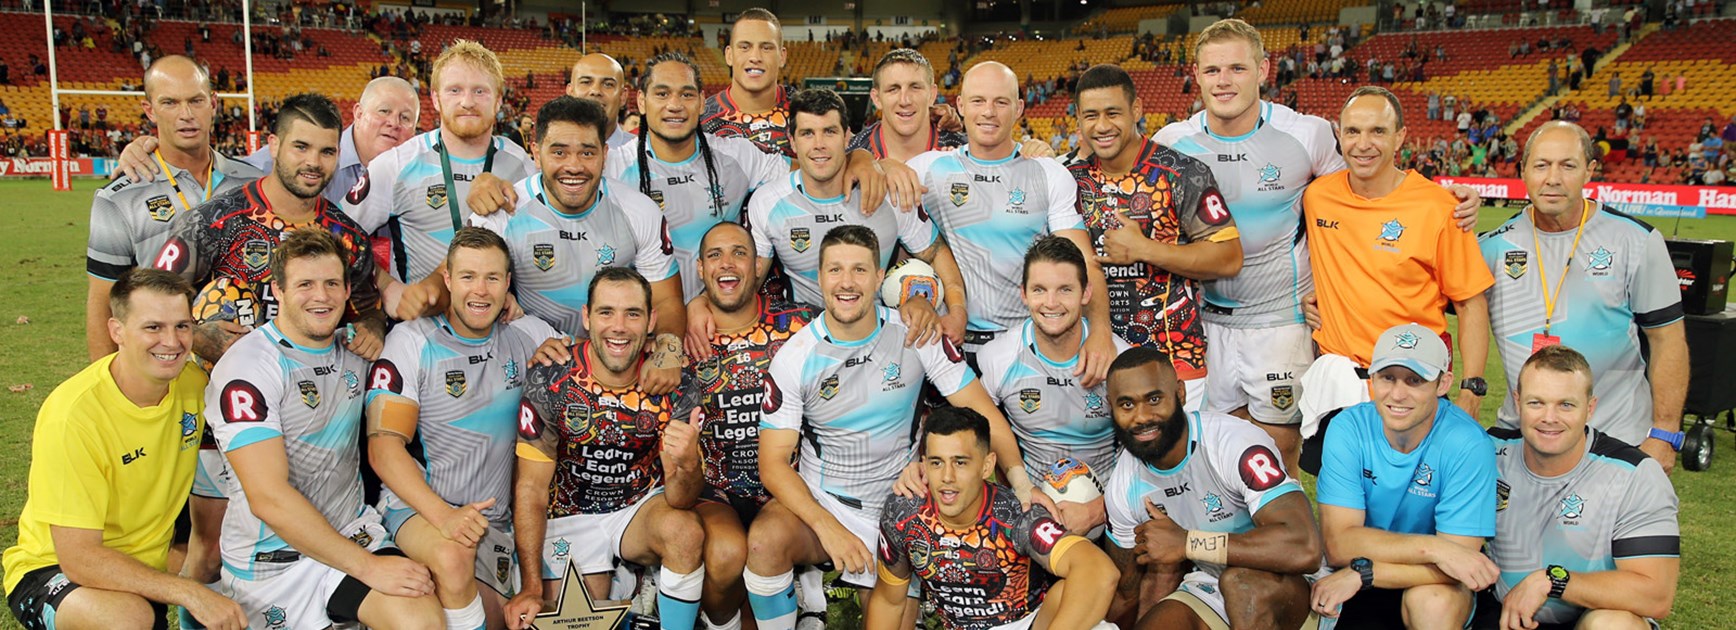 The 2016 World All Stars following their win over the Indigenous All Stars.